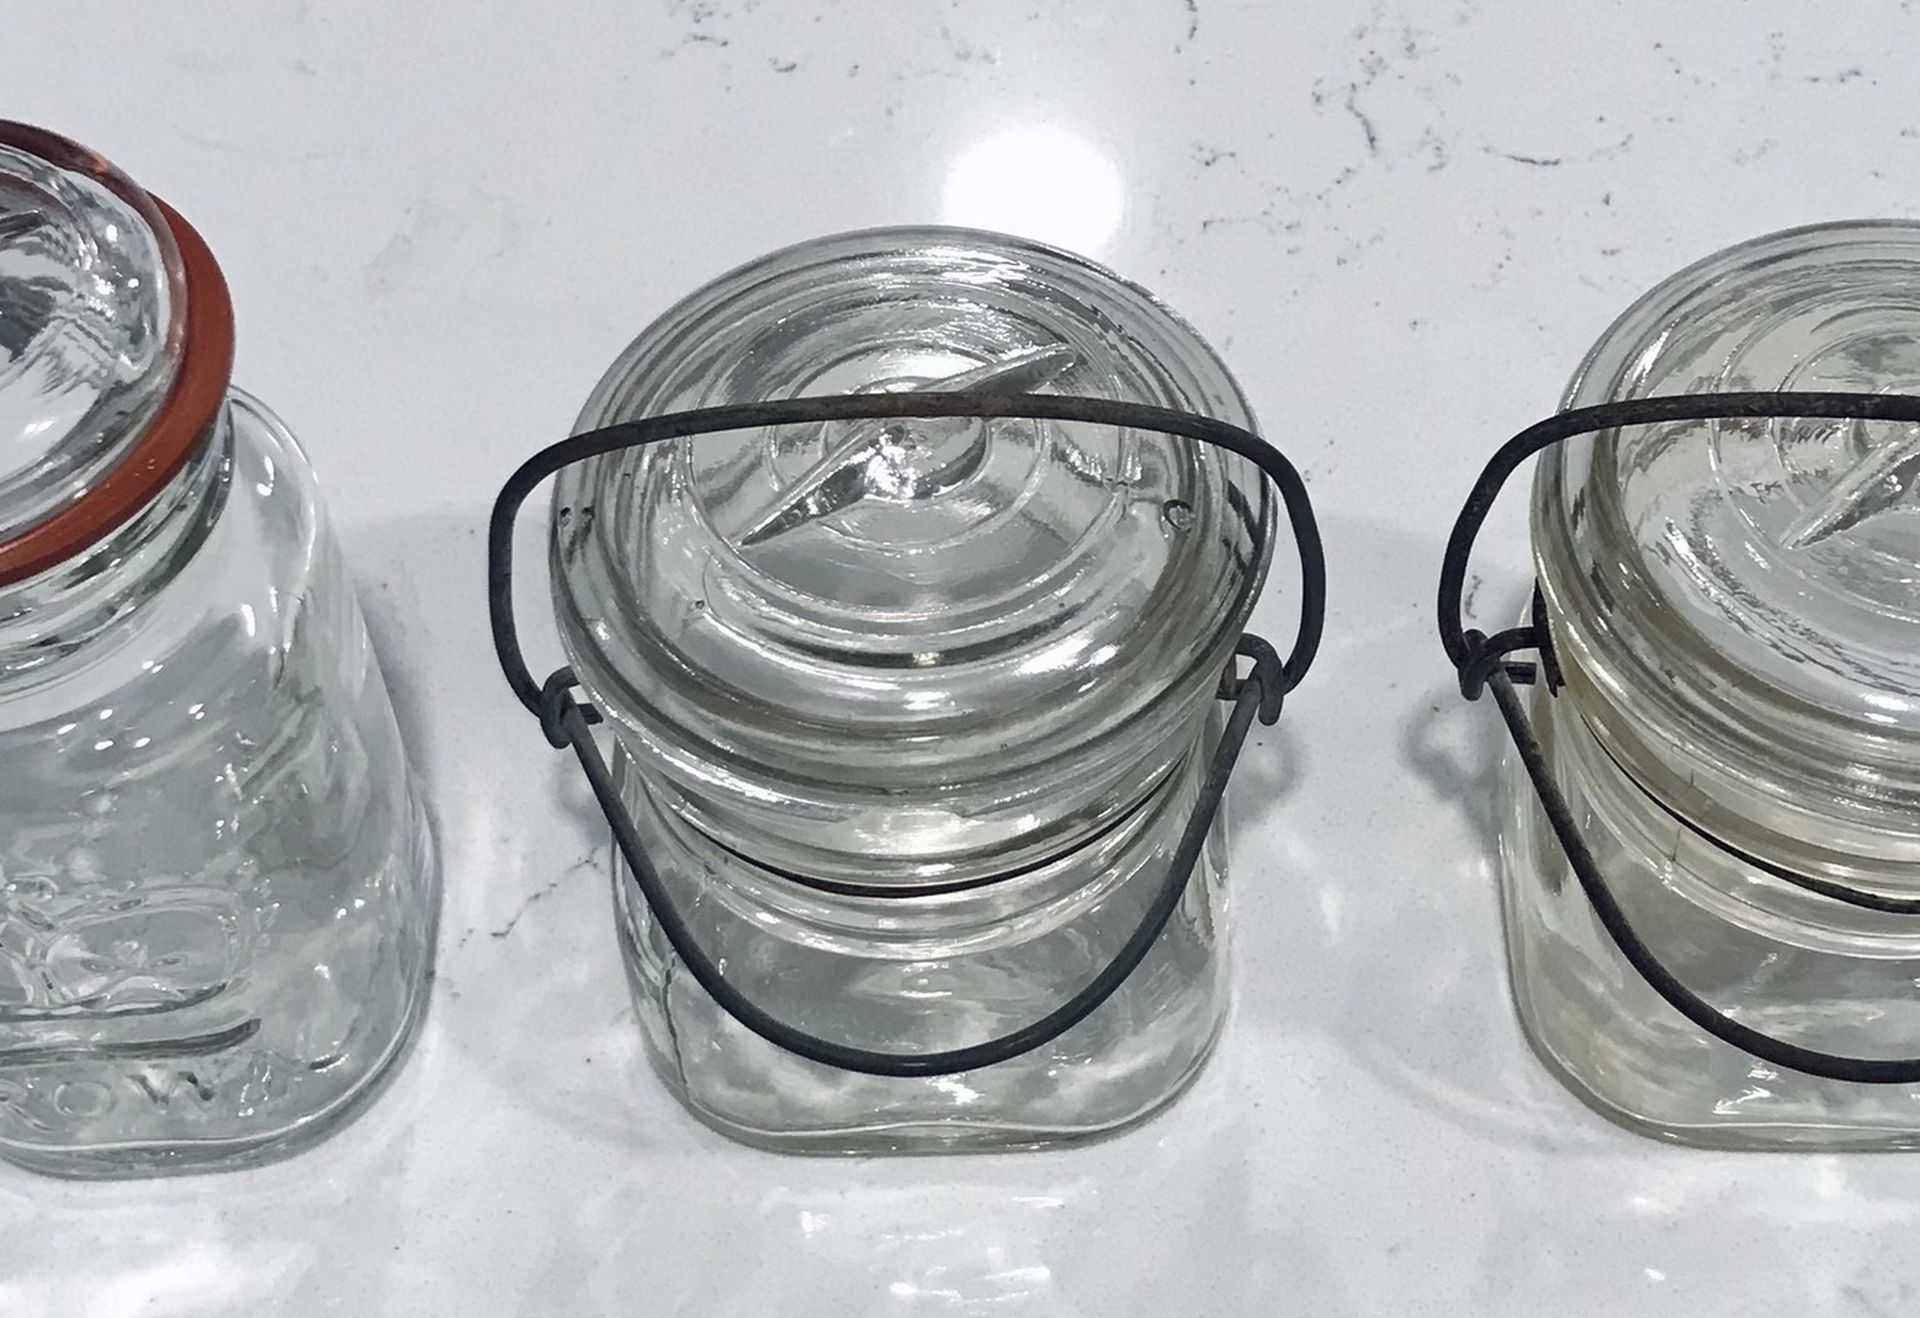 BEAUTIFUL VINTAGE APOTHECARY STYLE JARS WITH DETACHABLE LIDS (3). IN GOOD CONDITION